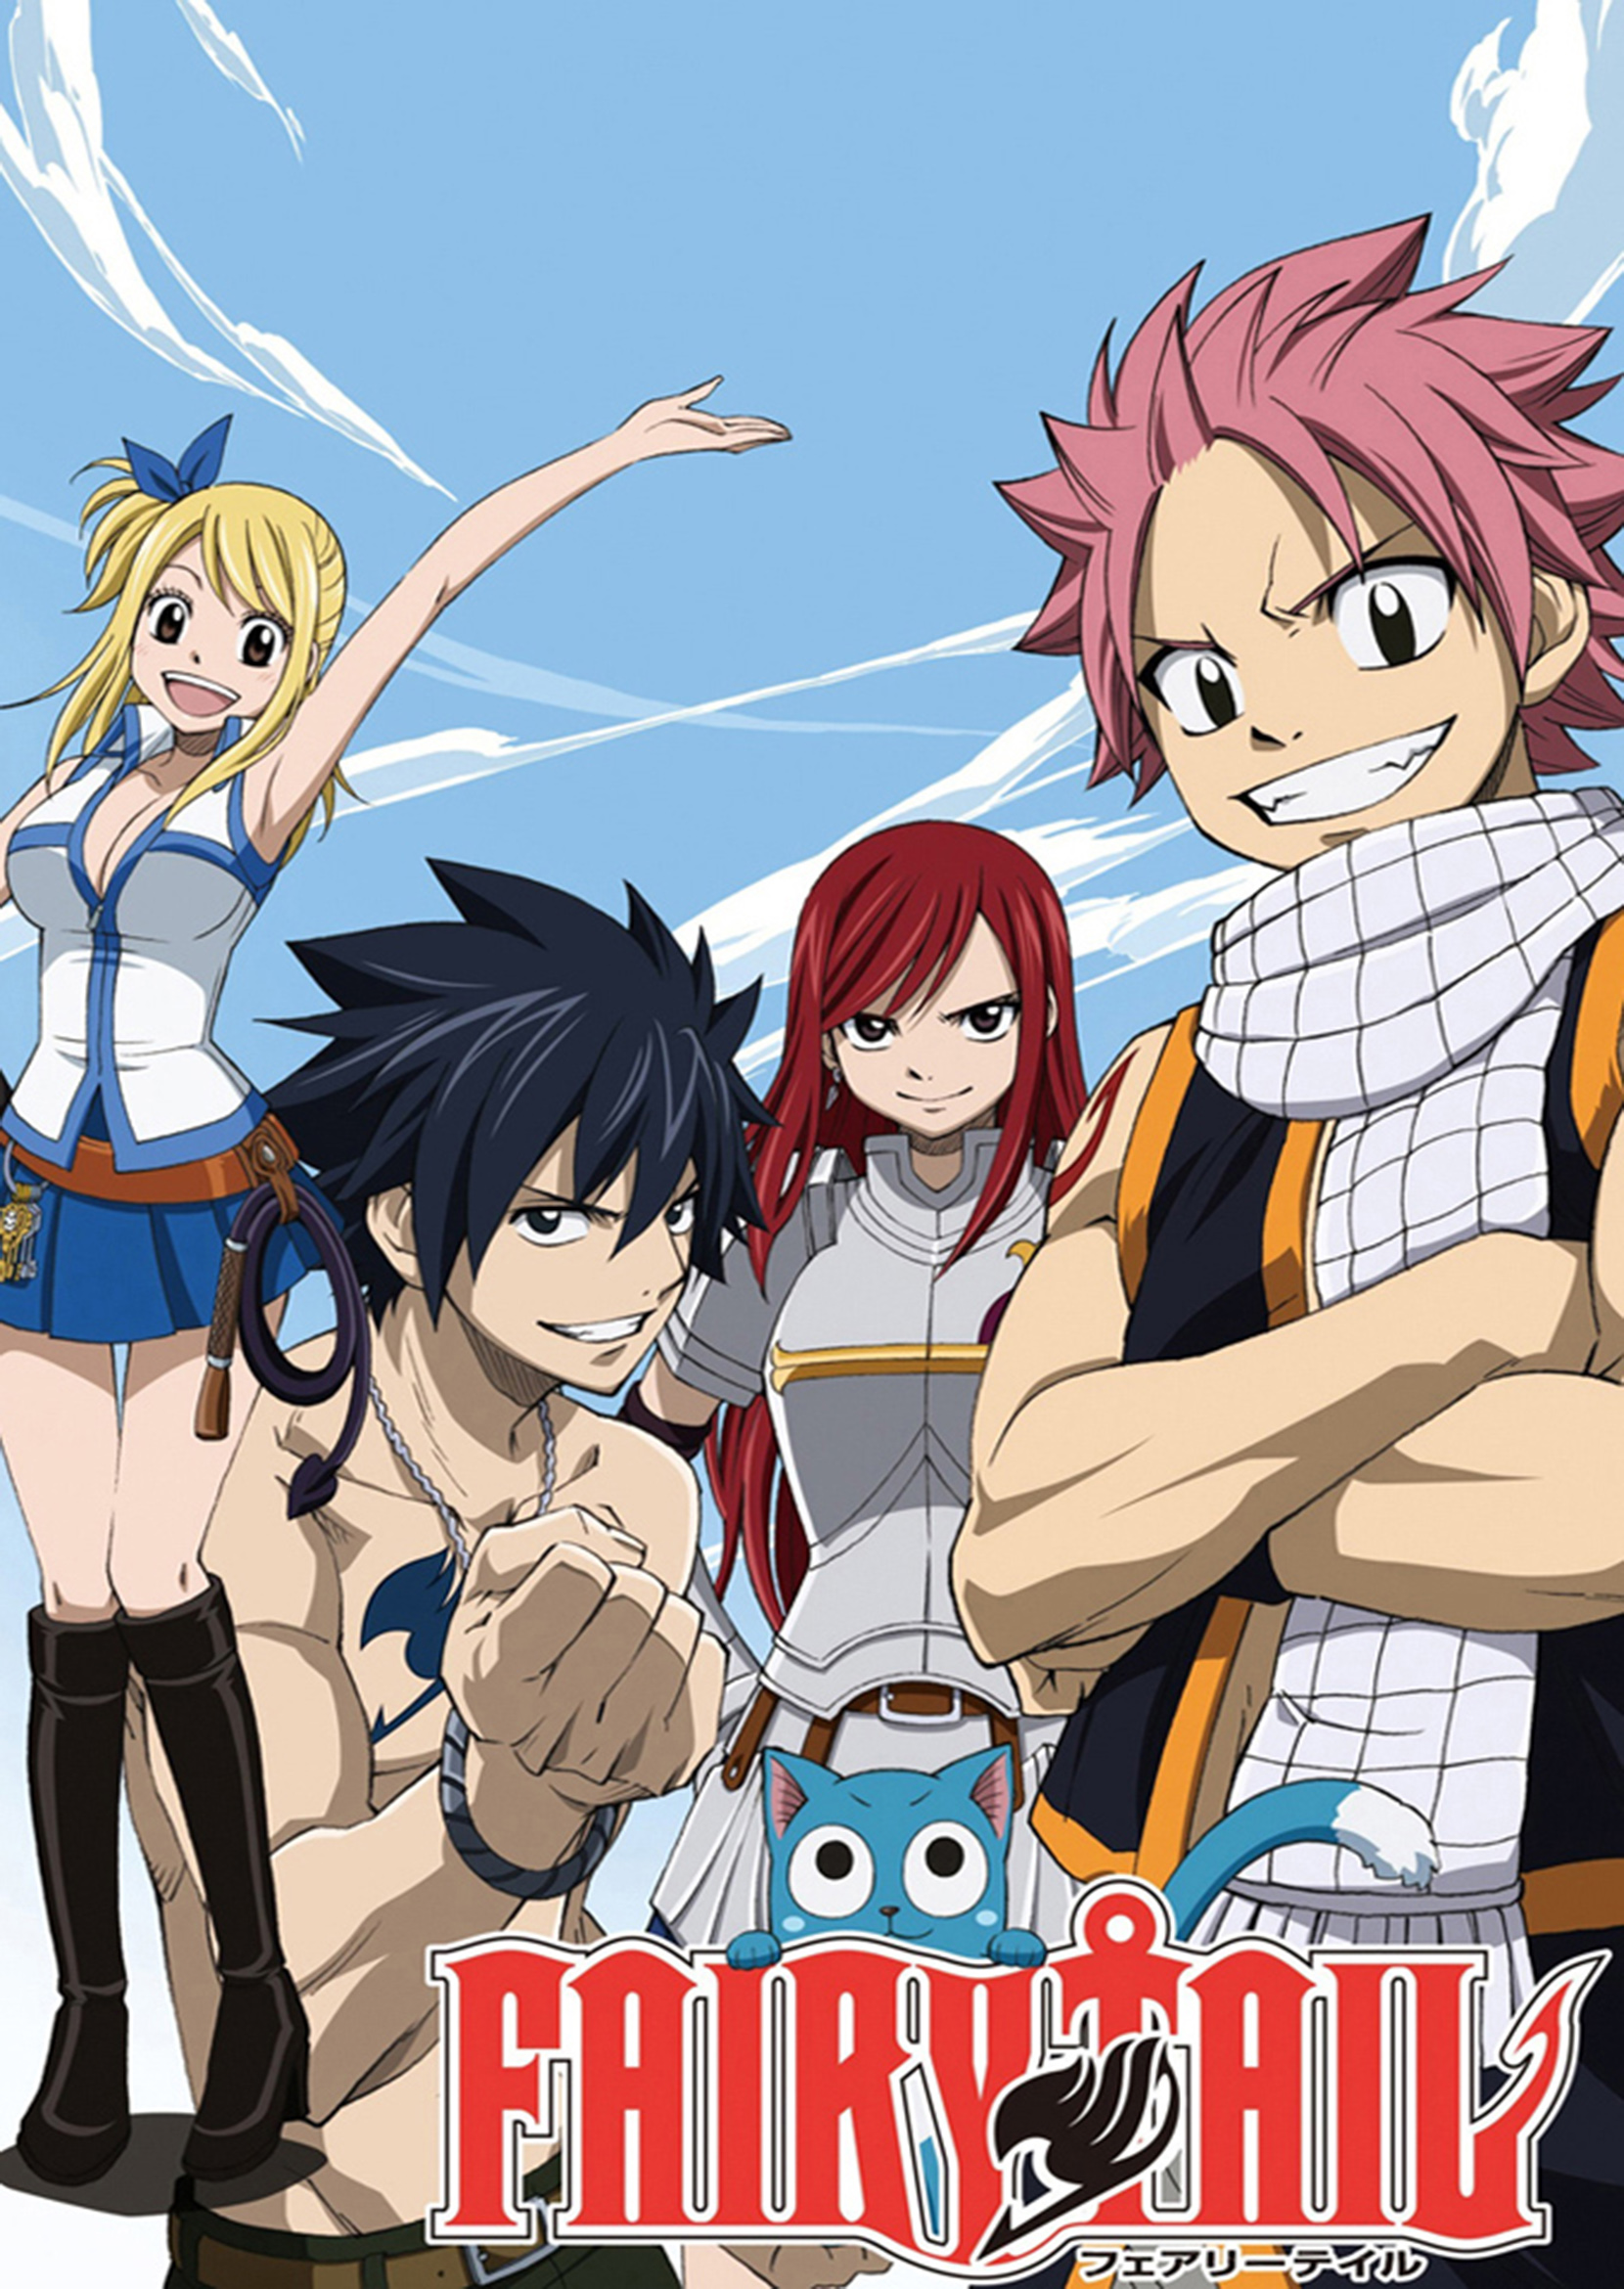 Fairy Tail - Group Plakat, Poster online på Europosters